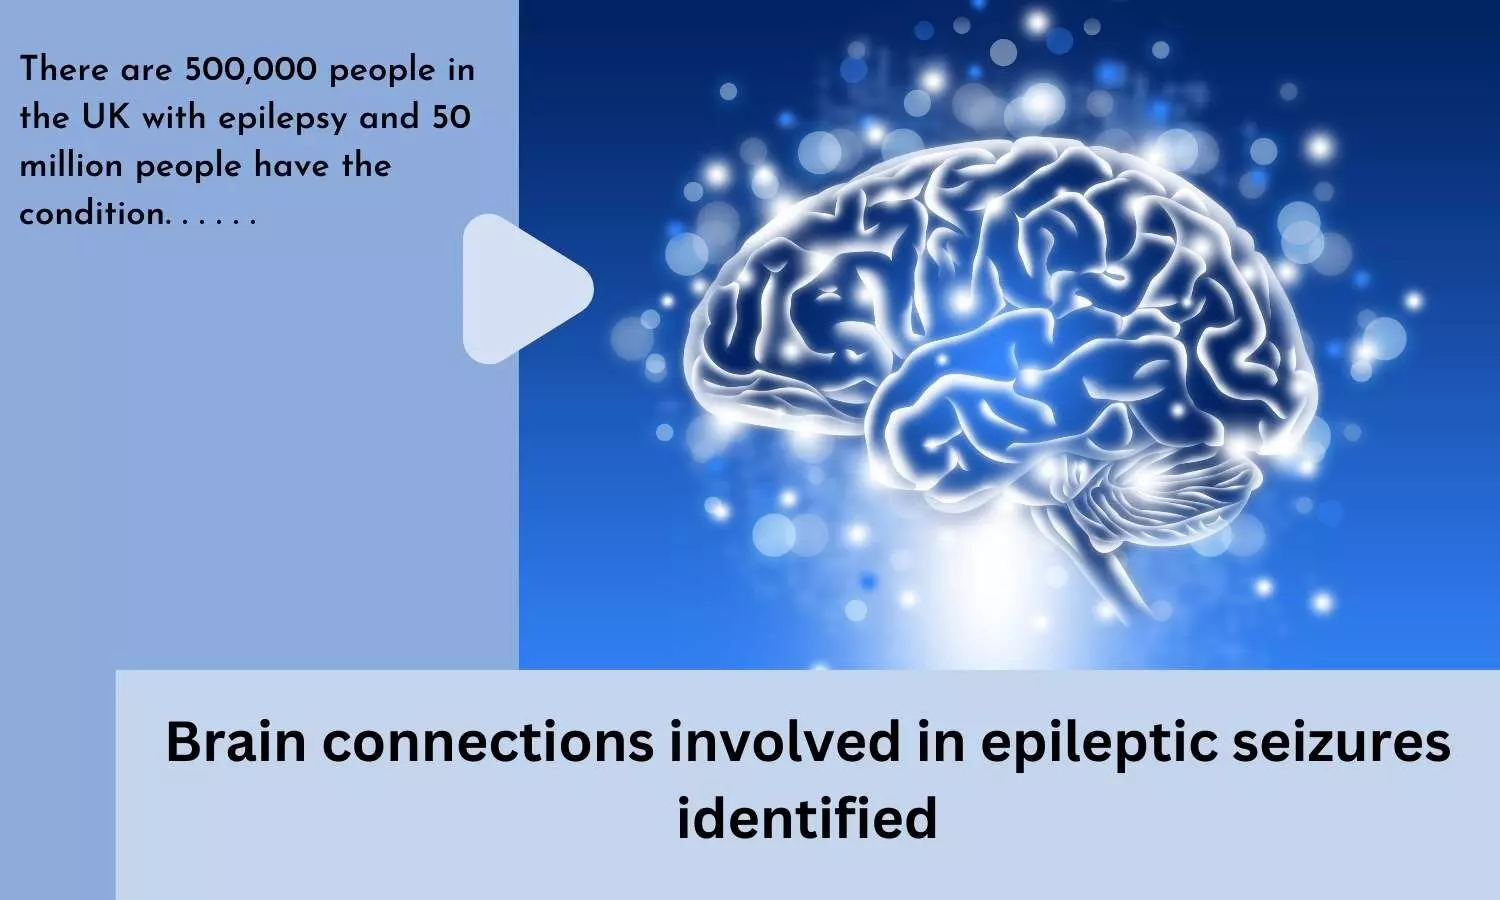 Brain connections involved in epileptic seizures identified